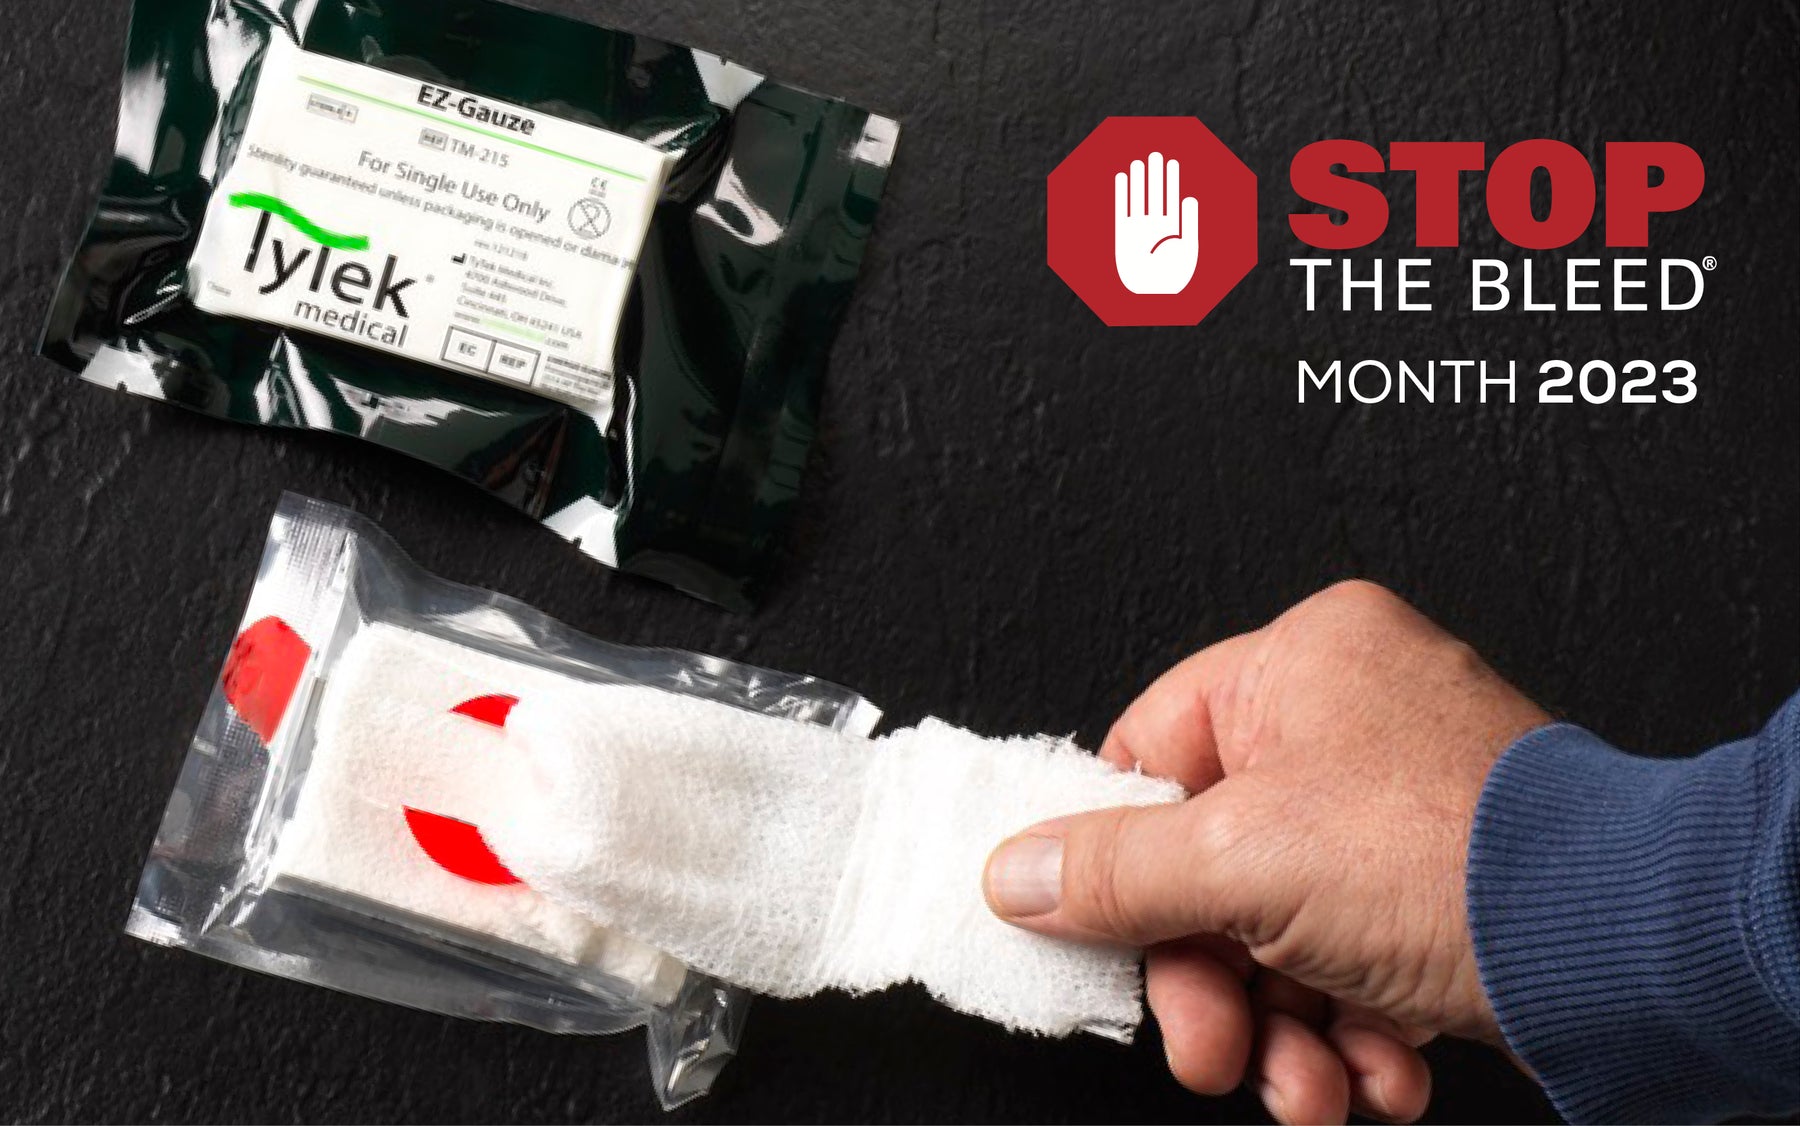 Stop the bleed month - with TyTek Medical